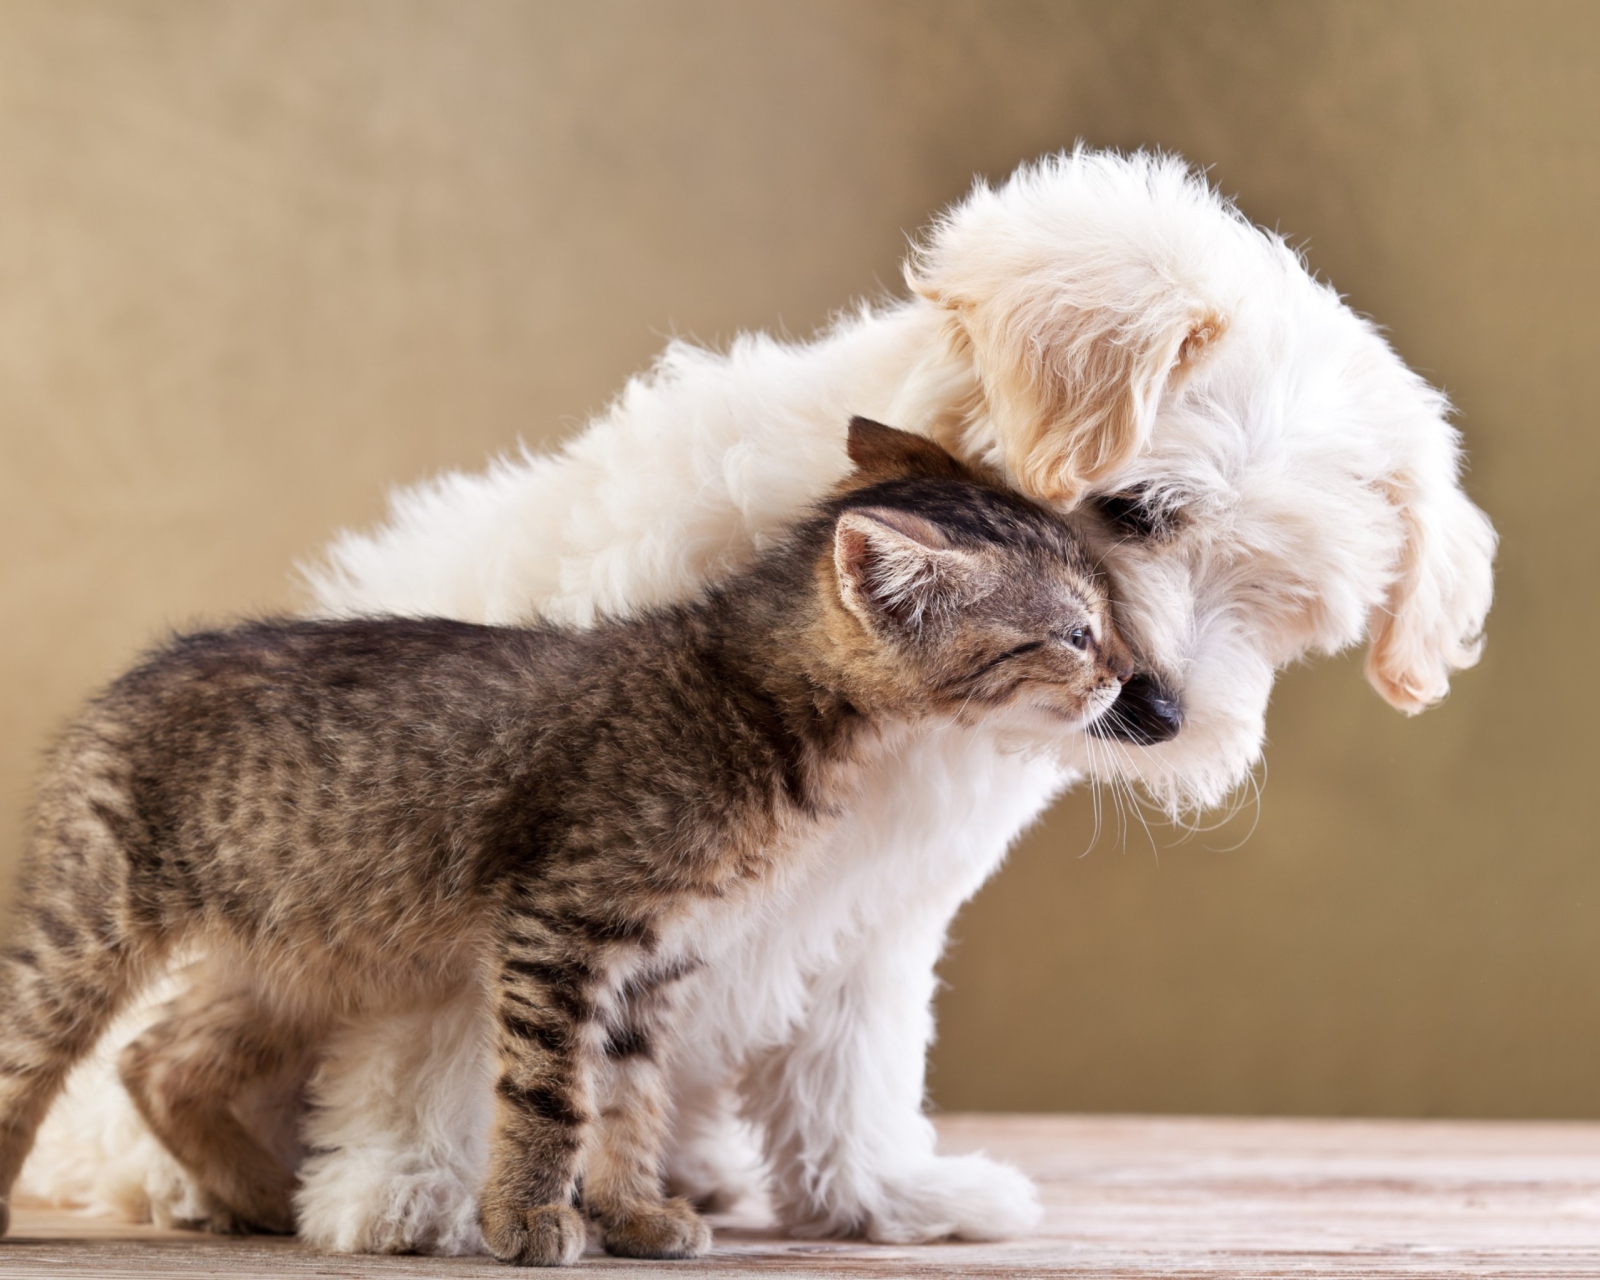 Life Of Cat And Dog wallpaper 1600x1280